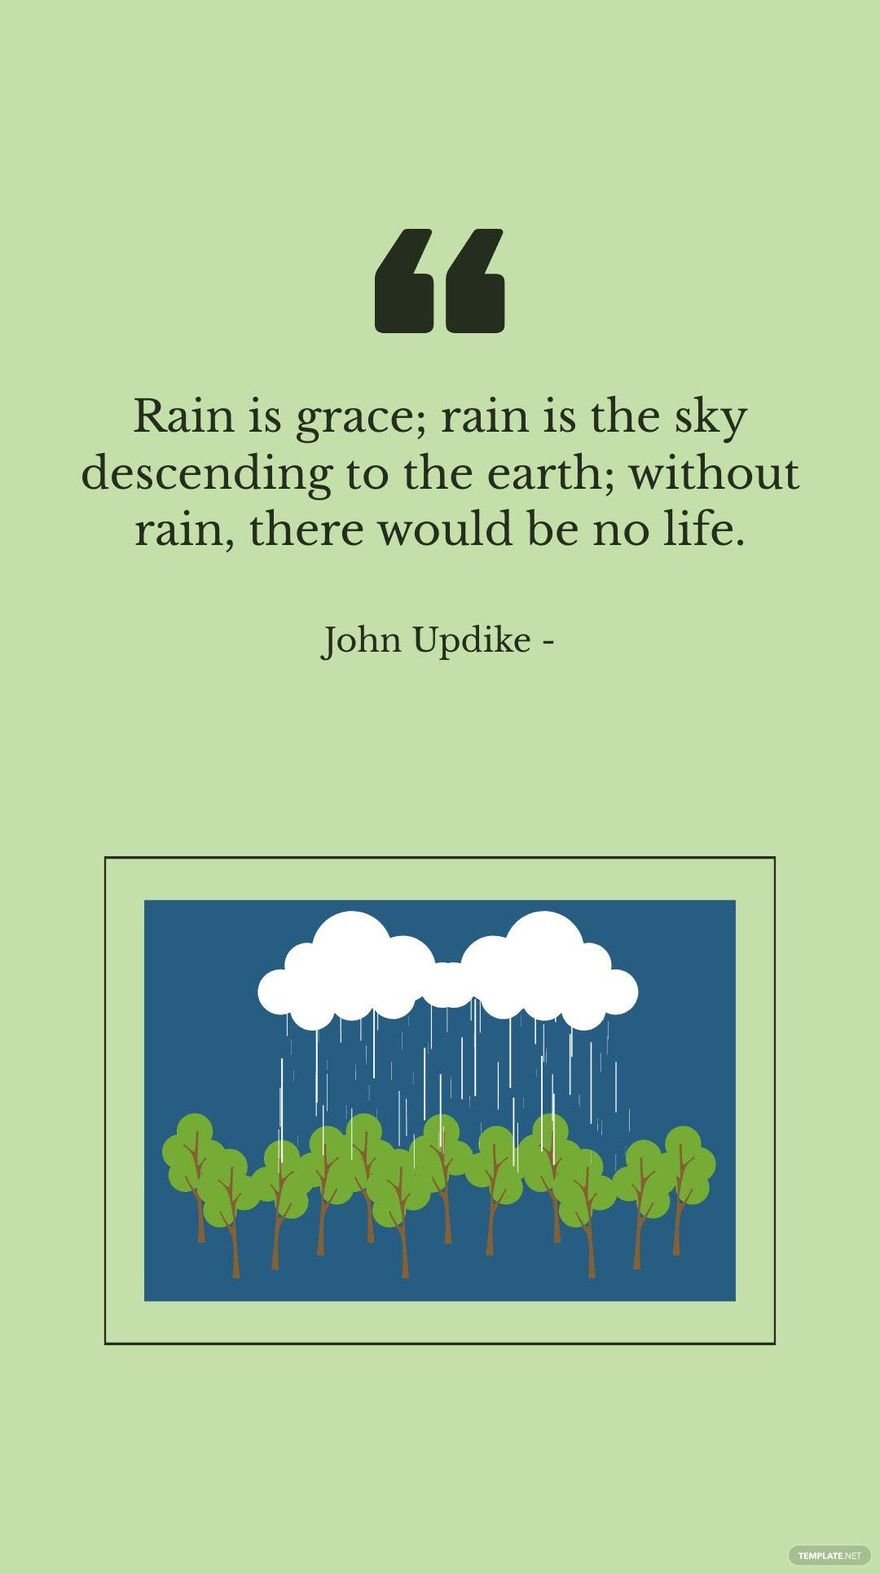 John Updike - Rain is grace; rain is the sky descending to the earth; without rain, there would be no life.